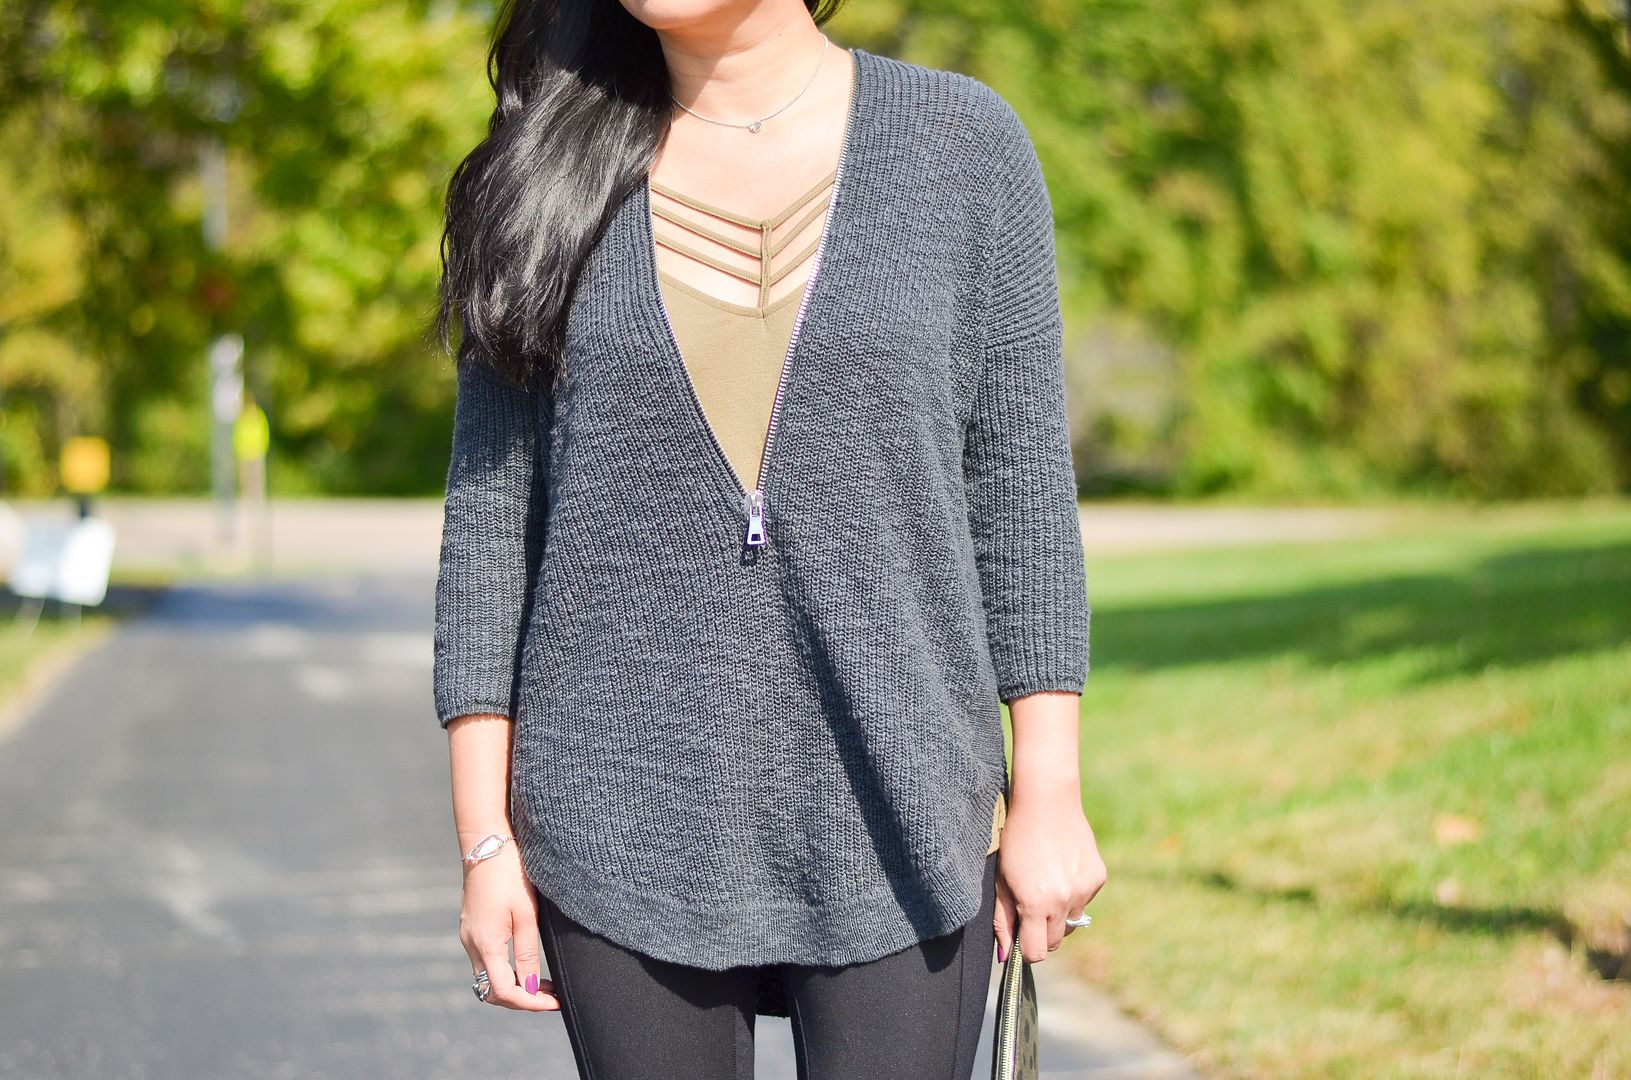 Express v-neck zip up sweater, express strappy cami